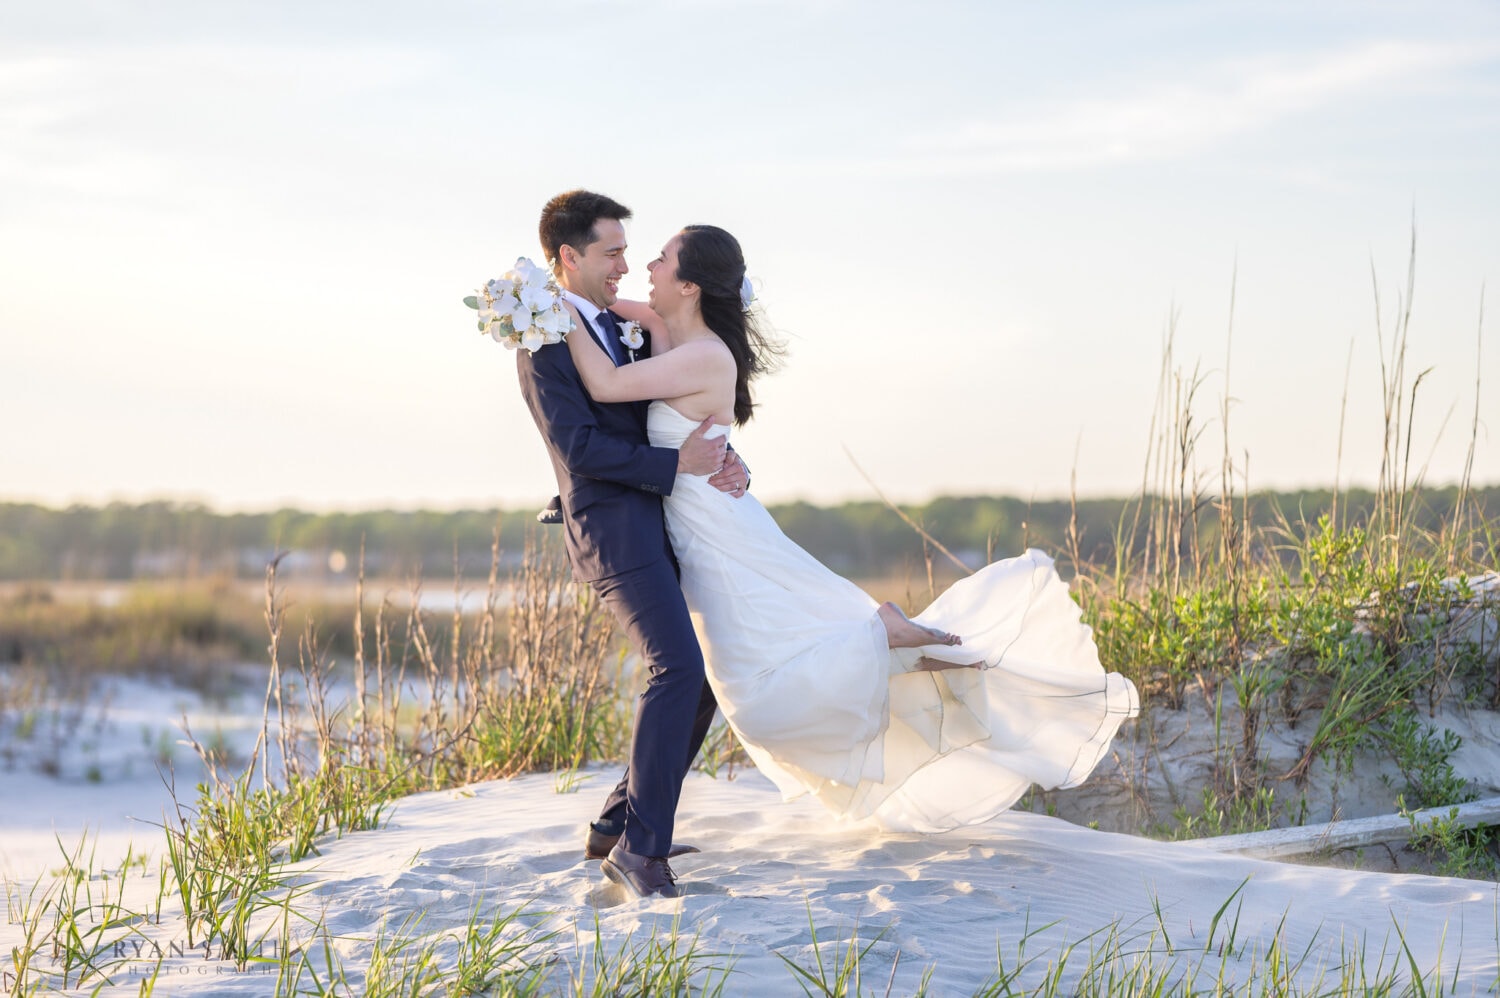 Lifting bride into the air on the dunes - Cherry Grove Point - North Myrtle Beach